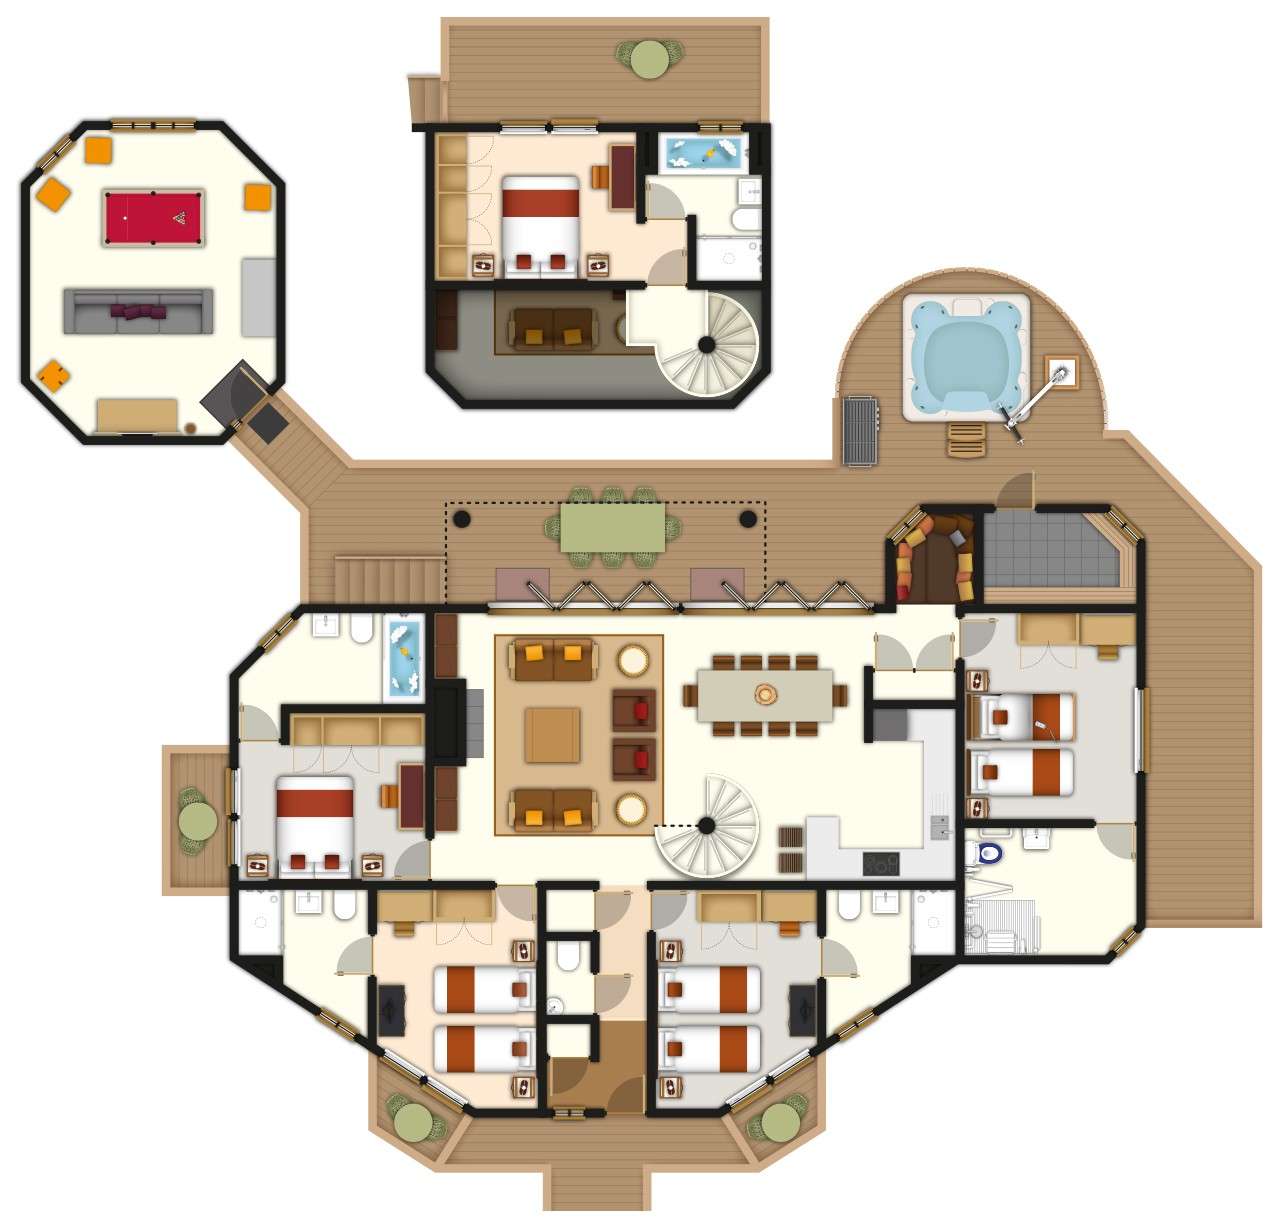 A detailed floor plan illustration of an adapted Treehouse. If you require further assistance viewing the floor plan or need further information please contact Guest Services.